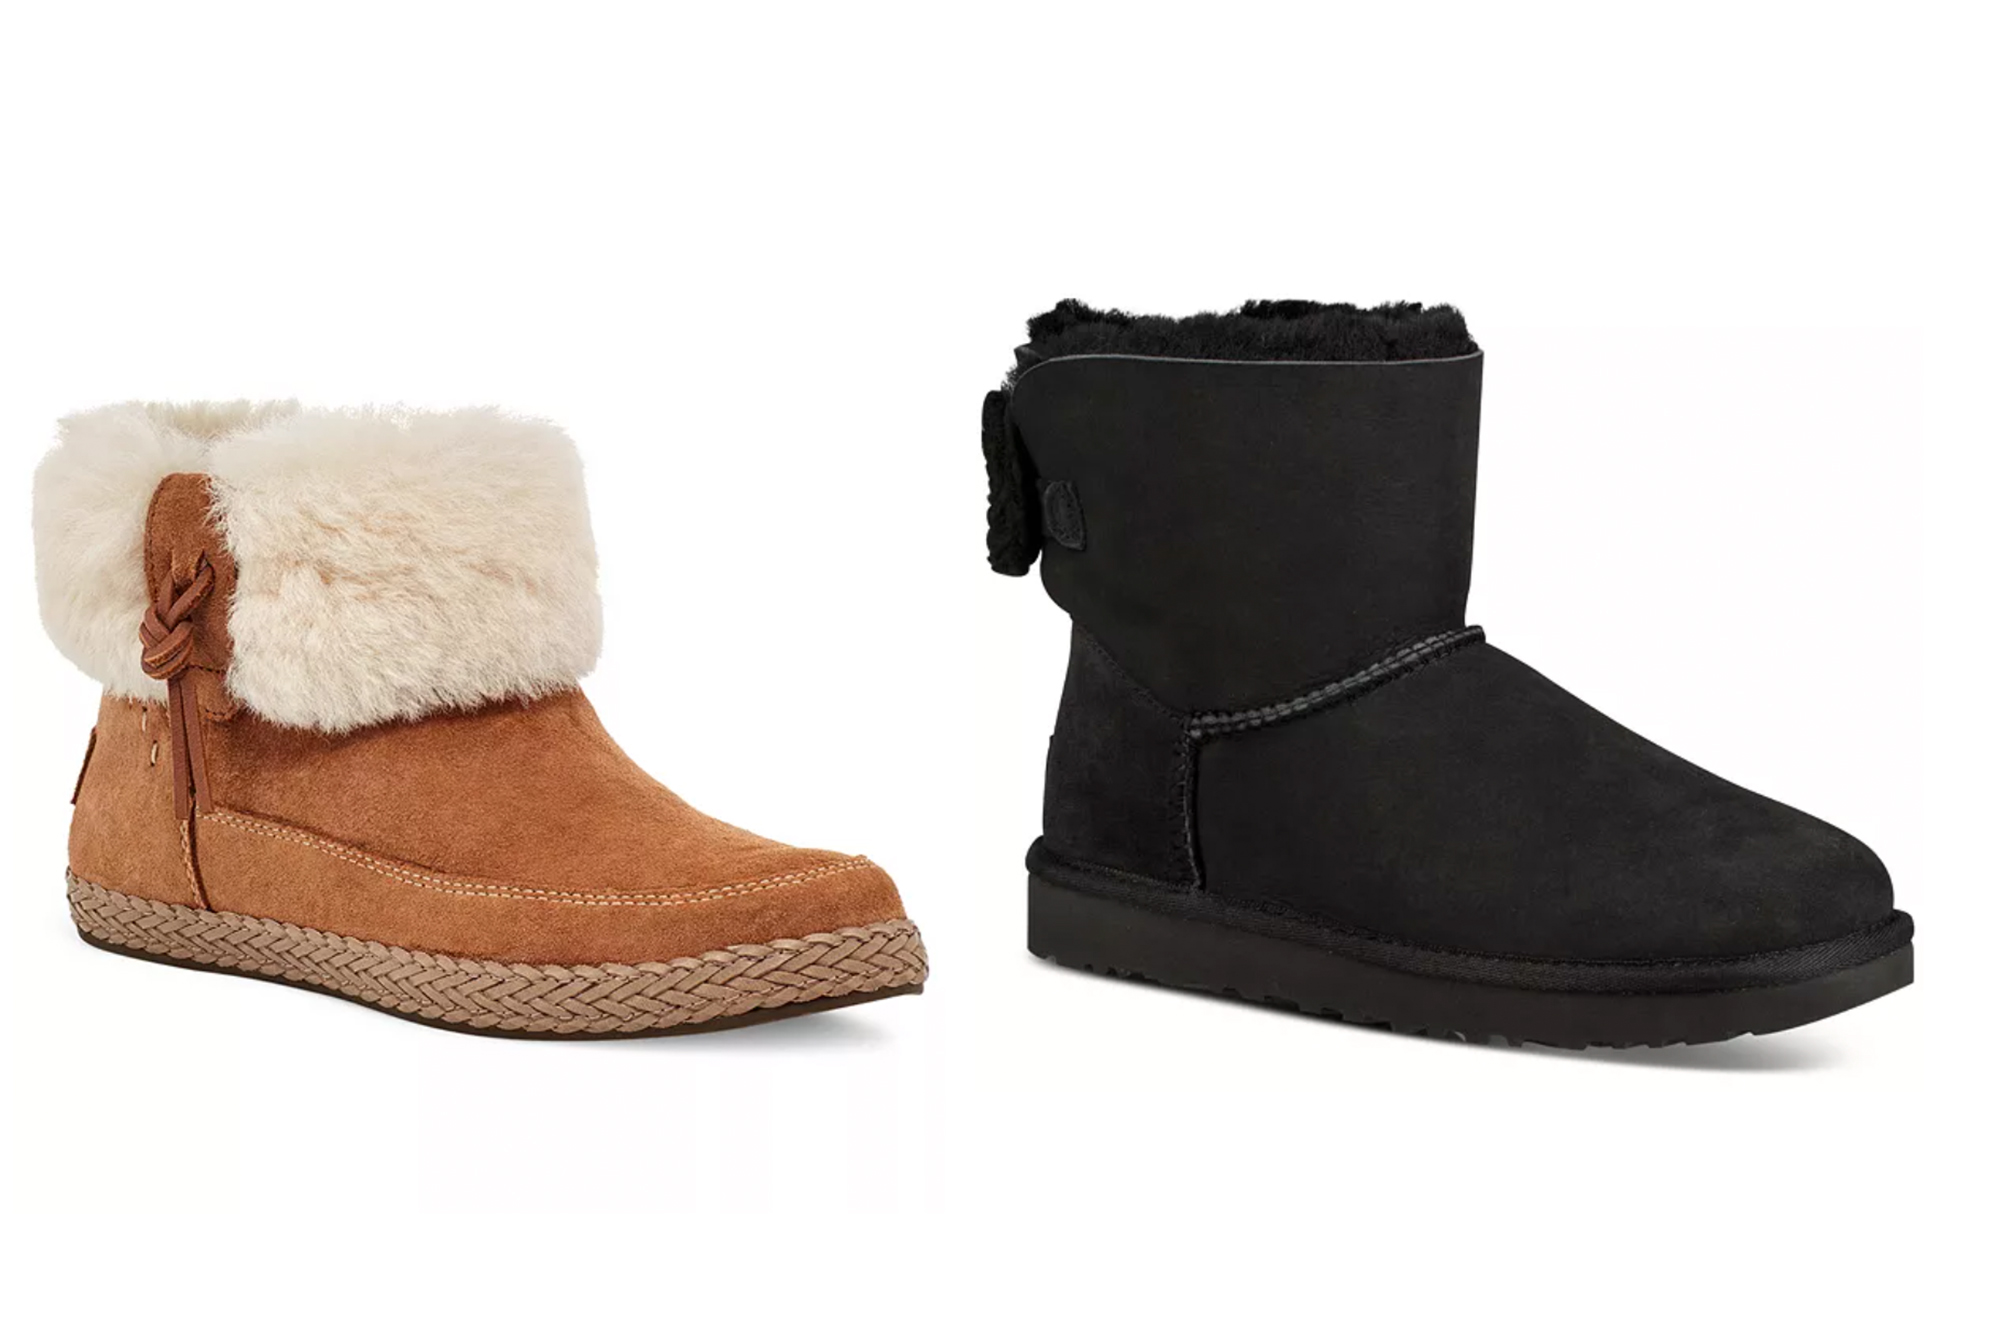 Prominent Miniatuur privacy Black Friday UGG Deals at Nordstrom, Macy's and Zappos — Big Savings